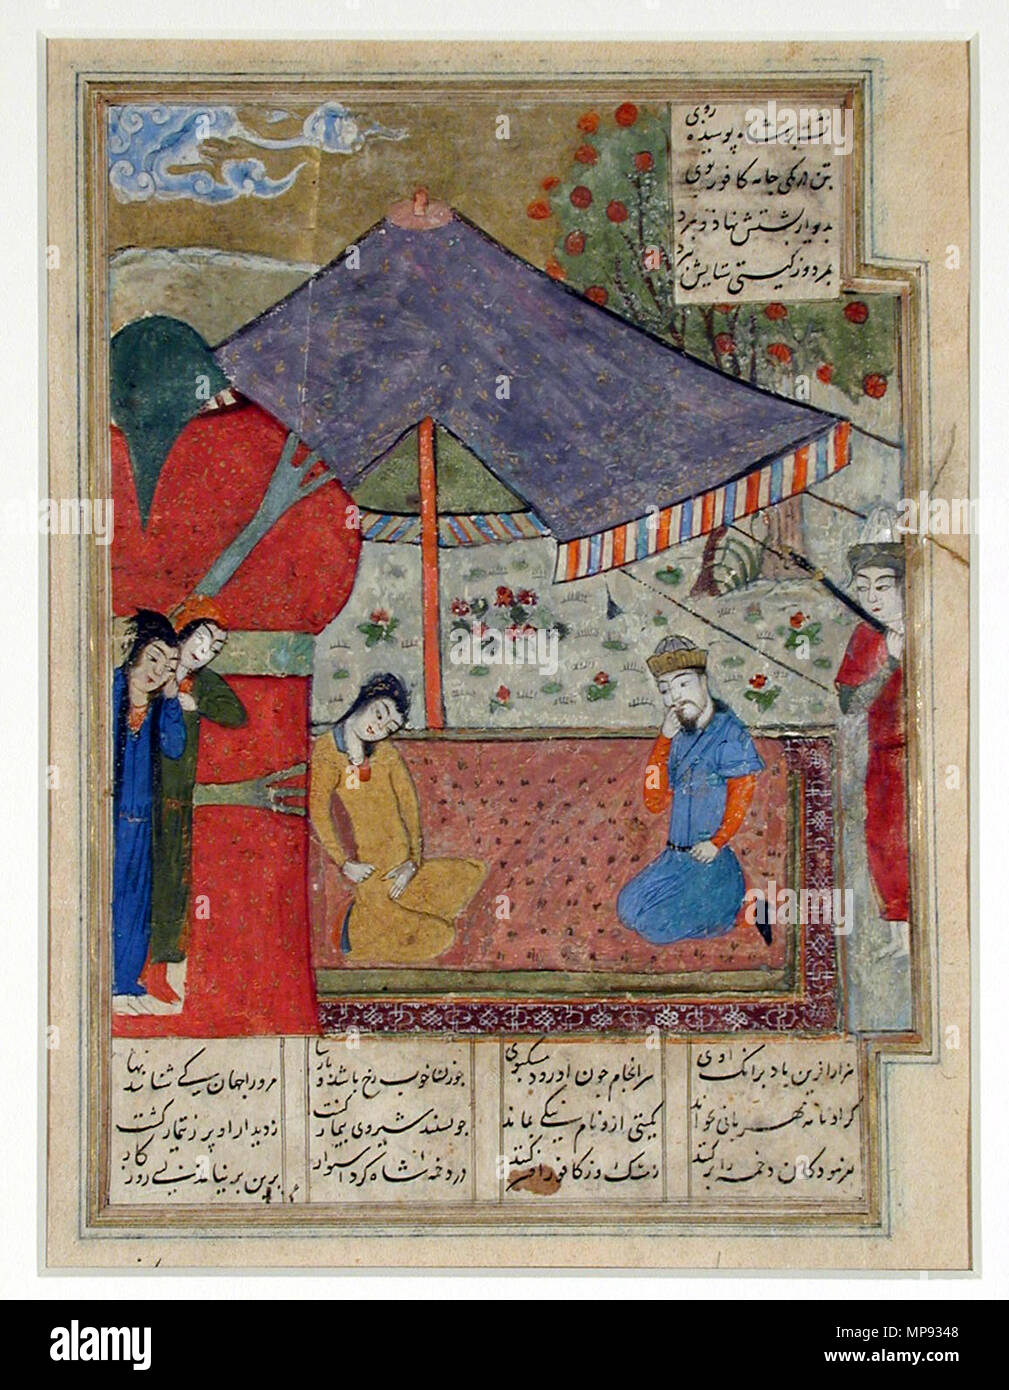 . English: Series Title: Shahnama of Ferdowsi Creation Date: ca. 1440 Display Dimensions: 10 1/8 in. x 7 3/4 in. (25.72 cm x 19.69 cm) Credit Line: Gift of Edwin Binney 3rd Accession Number: 1971.57 Collection: <a href='http://www.sdmart.org/art/our-collection/asian-art' rel='nofollow'>The San Diego Museum of Art</a> . 1 October 2001, 12:23:47. English: thesandiegomuseumofartcollection 1171 The Death of Shirin (6125039644) Stock Photo